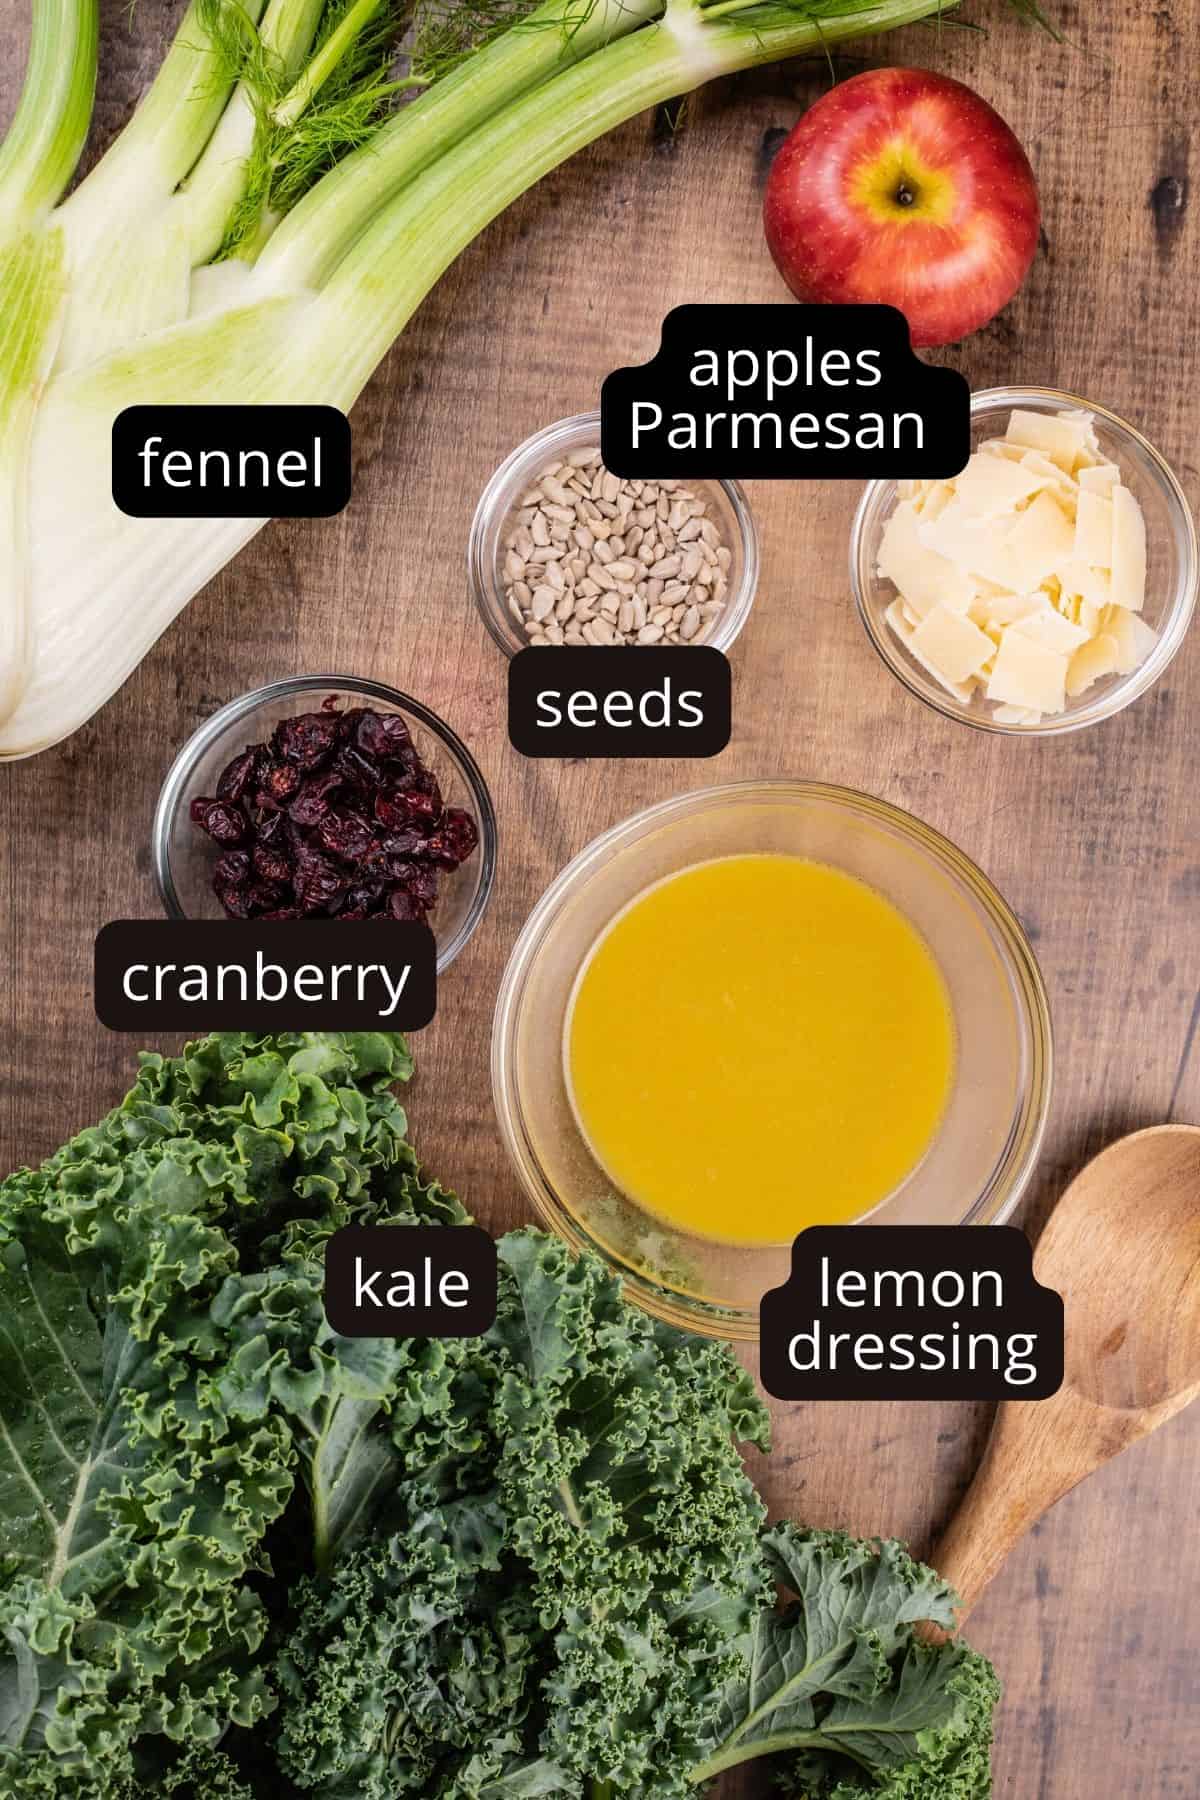 ingredients for a kale and cranberry salad in various glass bowls on a wood tabletop.